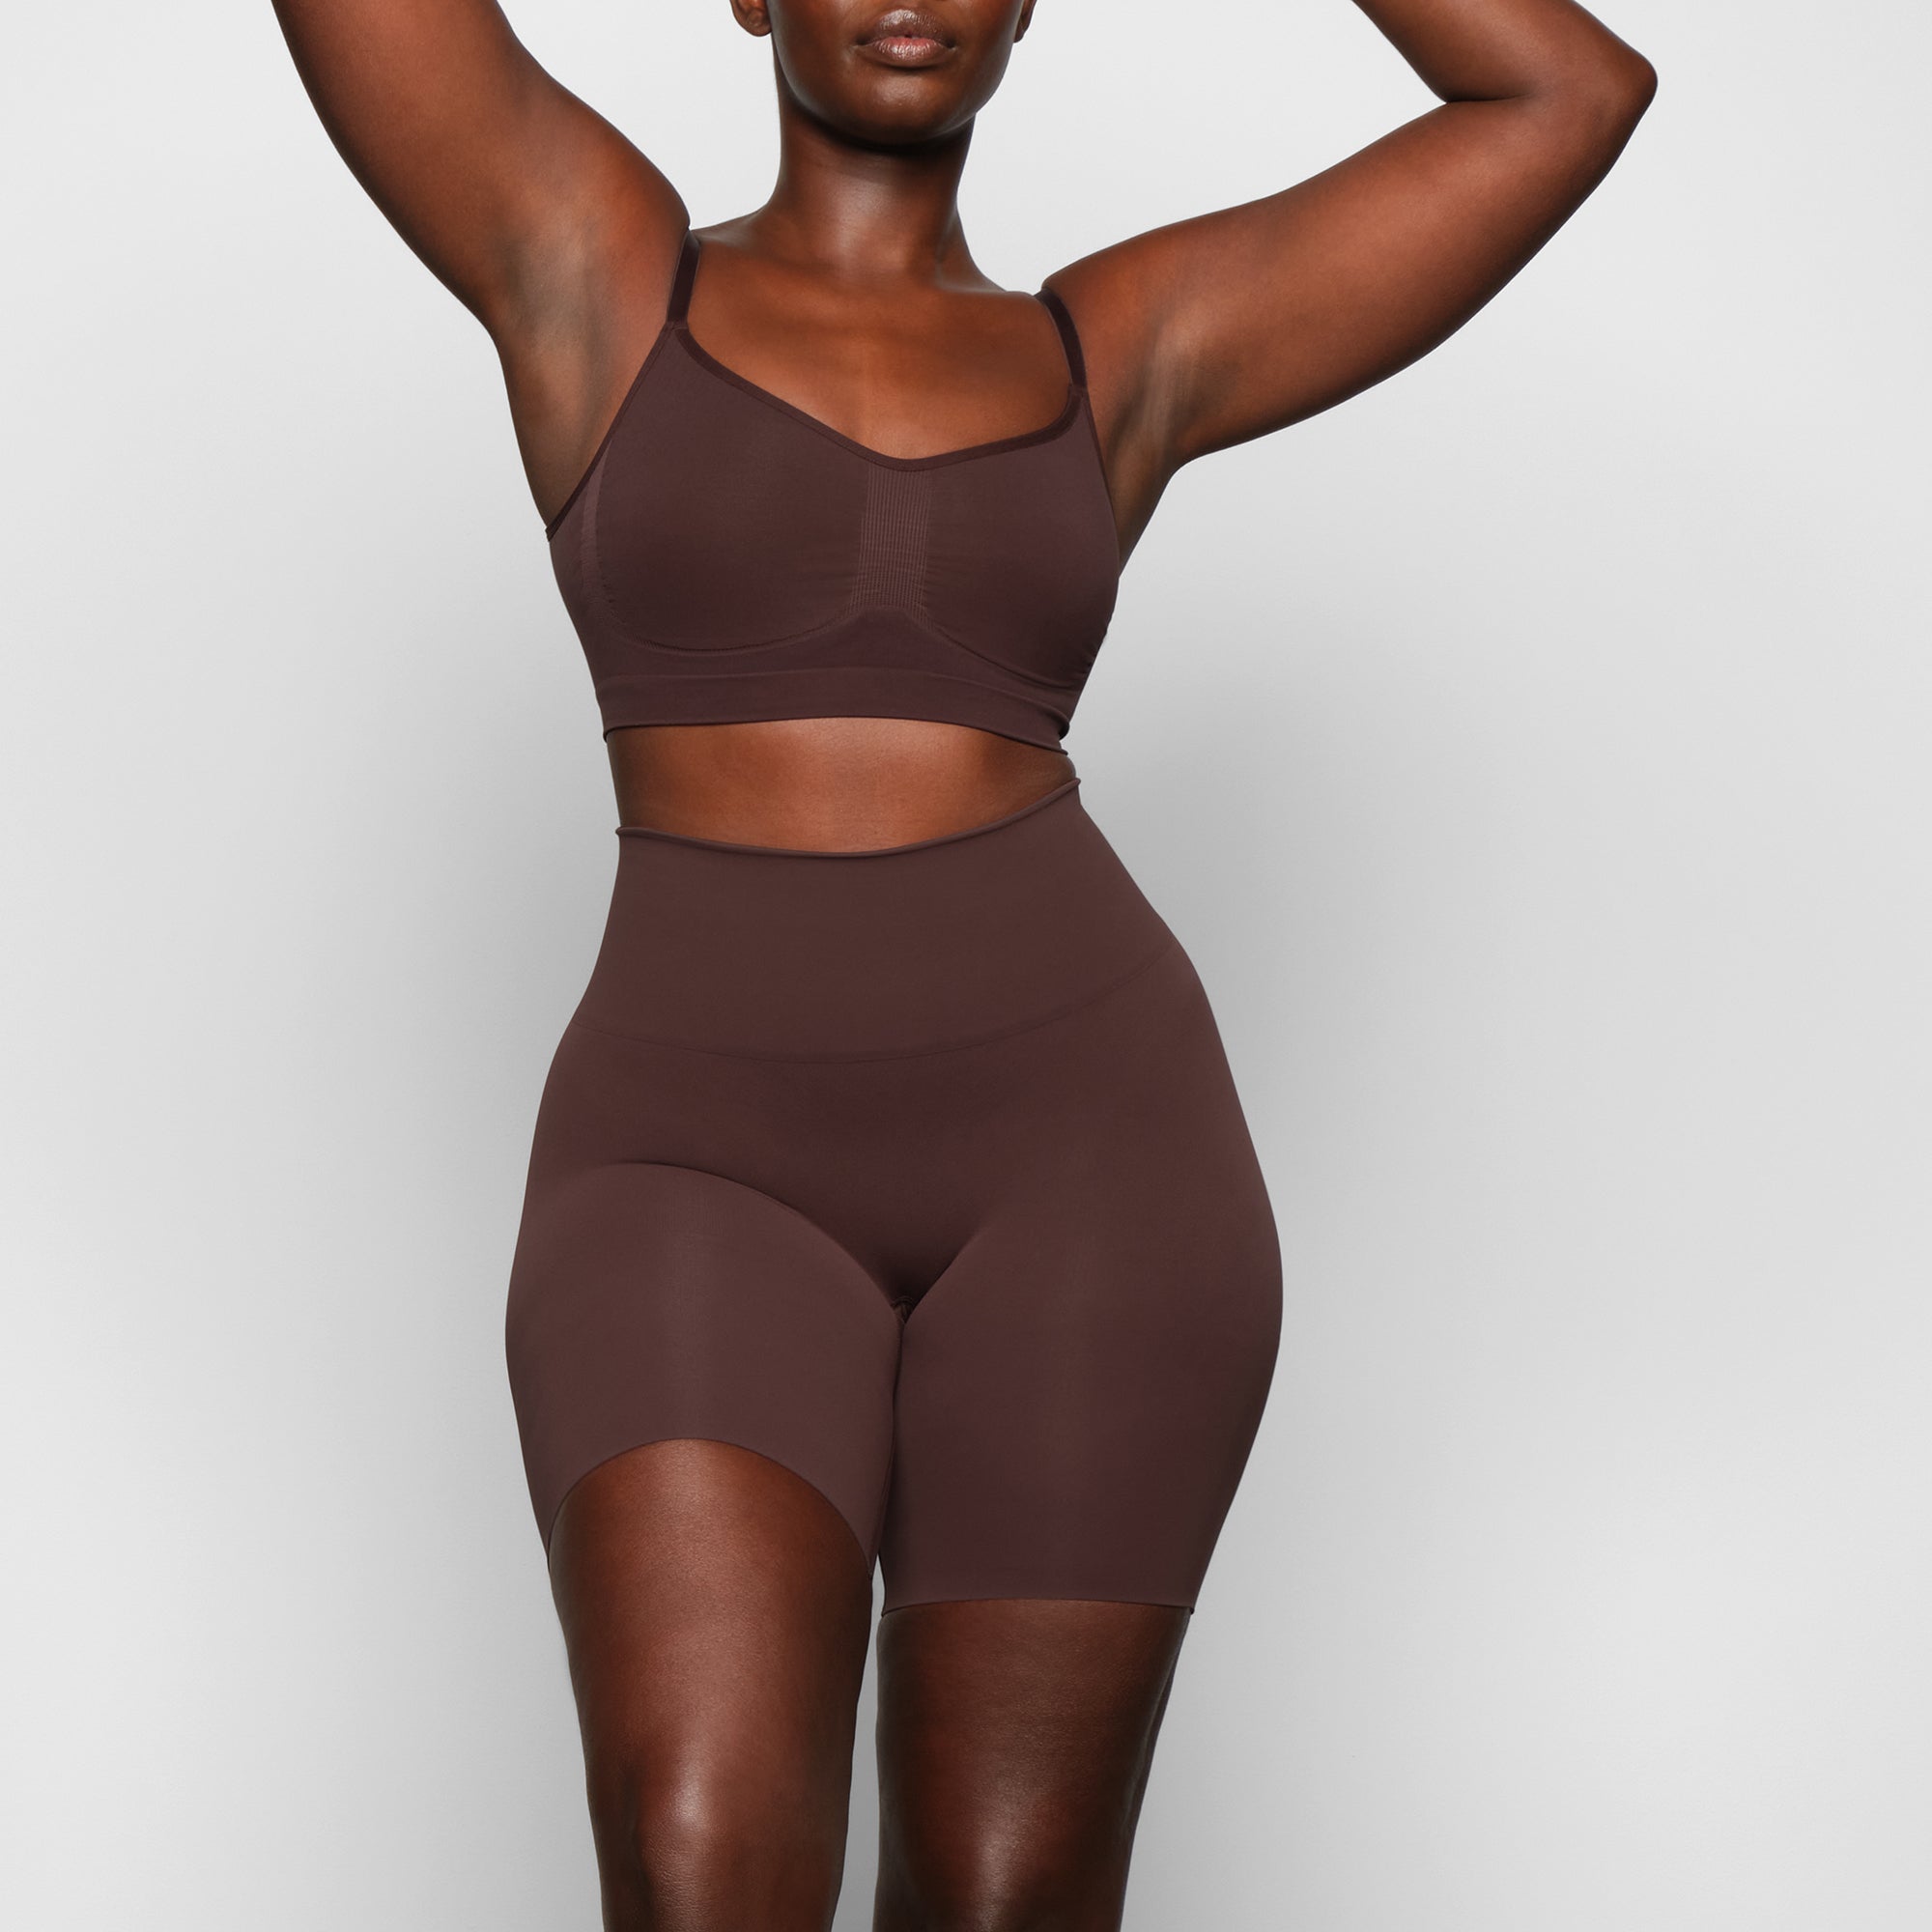 SKIMS Butt Enhancing Shapewear review with @Janette Ok